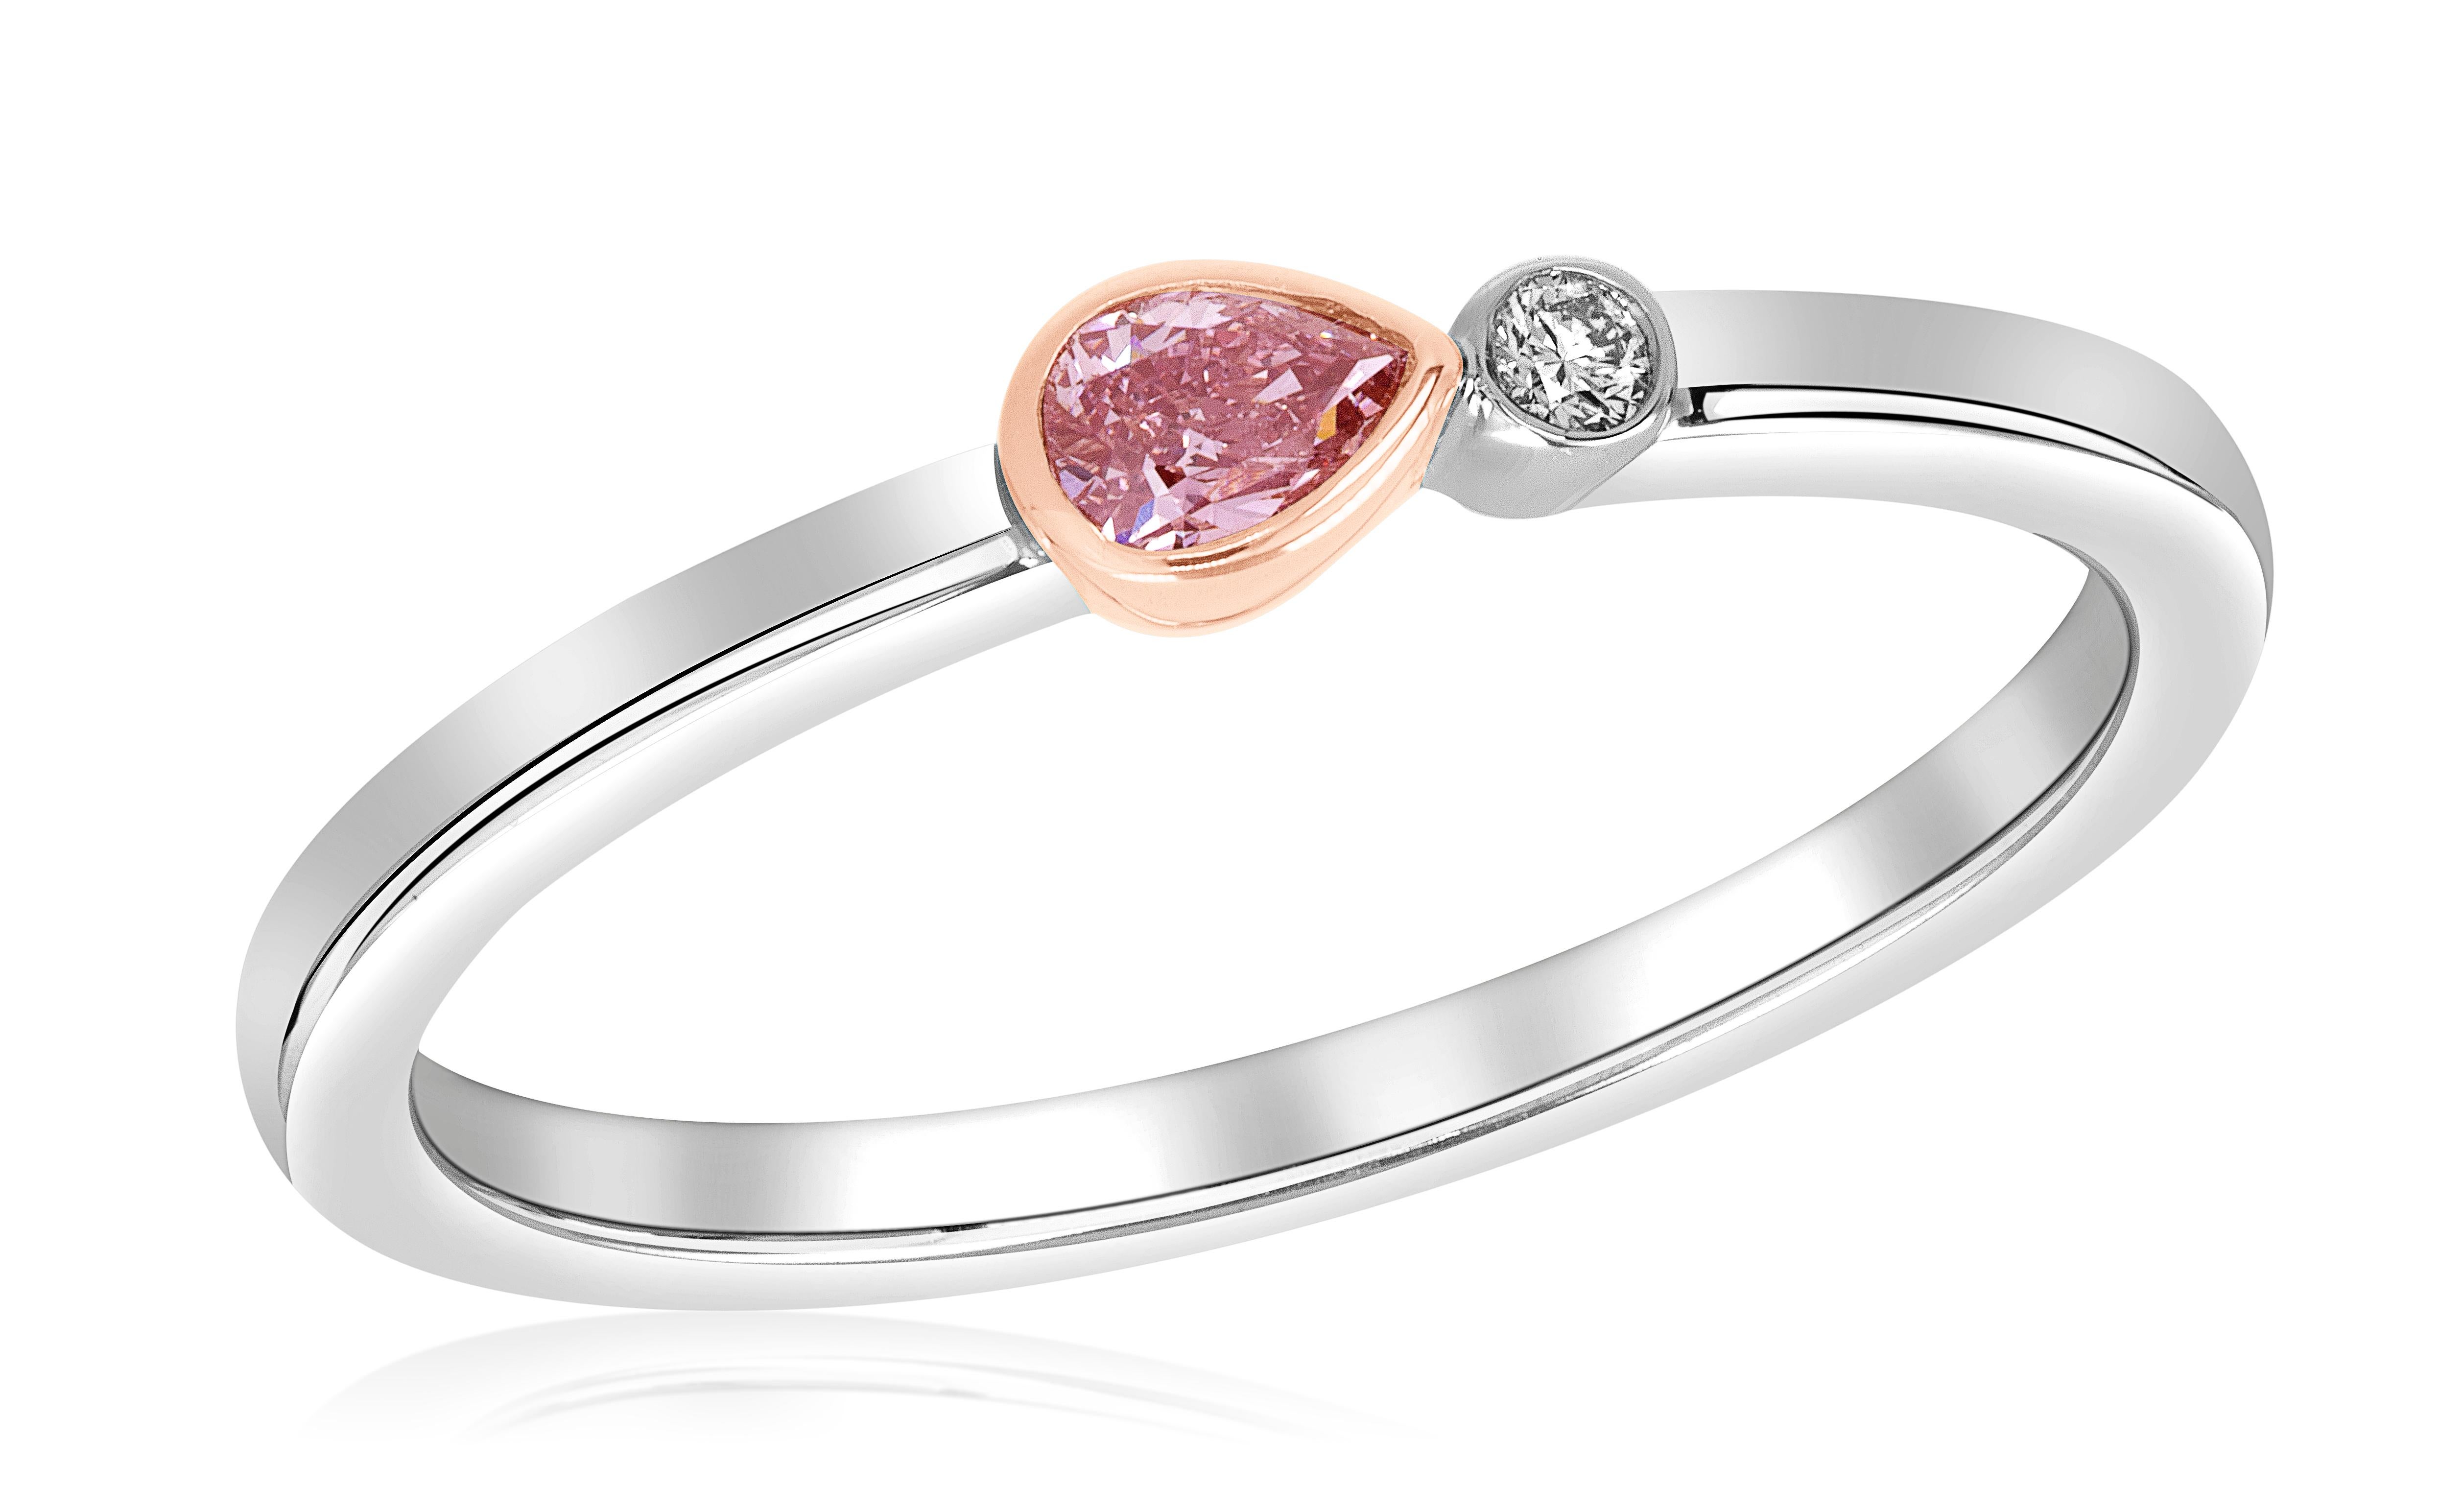 Stackable ring featuring a 0.14 carat fancy pink pear-shape diamond, GIA#: 6213437485, accented by 0.02 carats melee. Set in 18k rose and white gold. Ring size 6.5